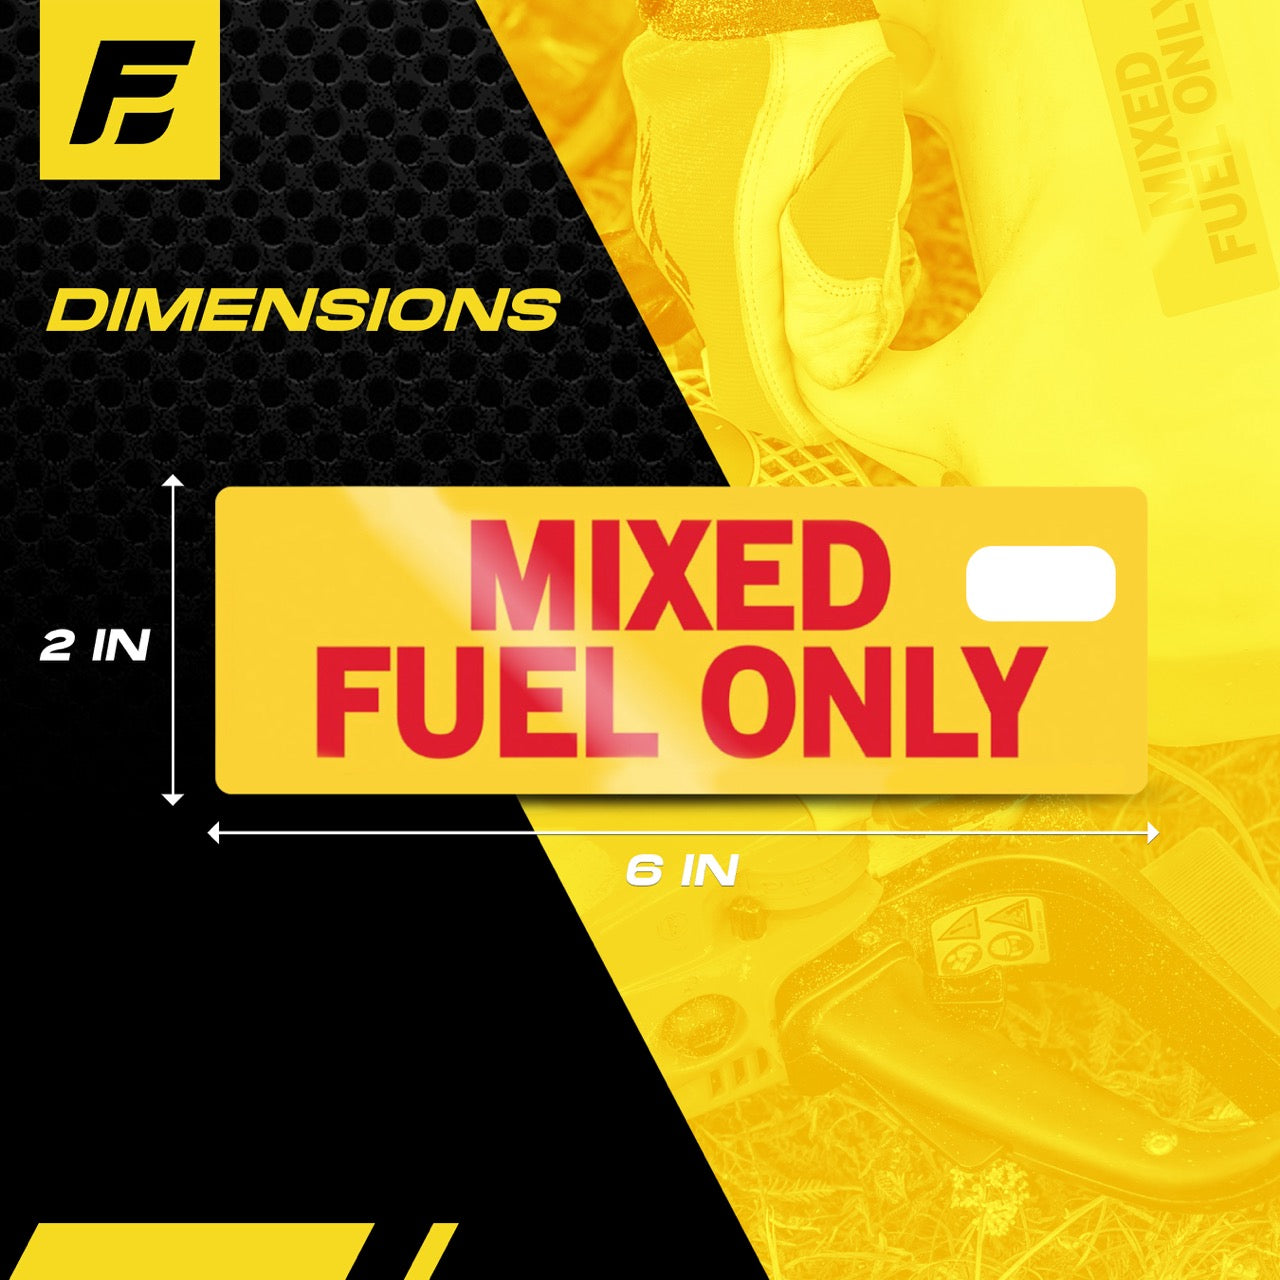 Mixed Fuel Only Sticker - Fuel Identification Label by Fuel Sticker | 2"x6" | 2 Pack